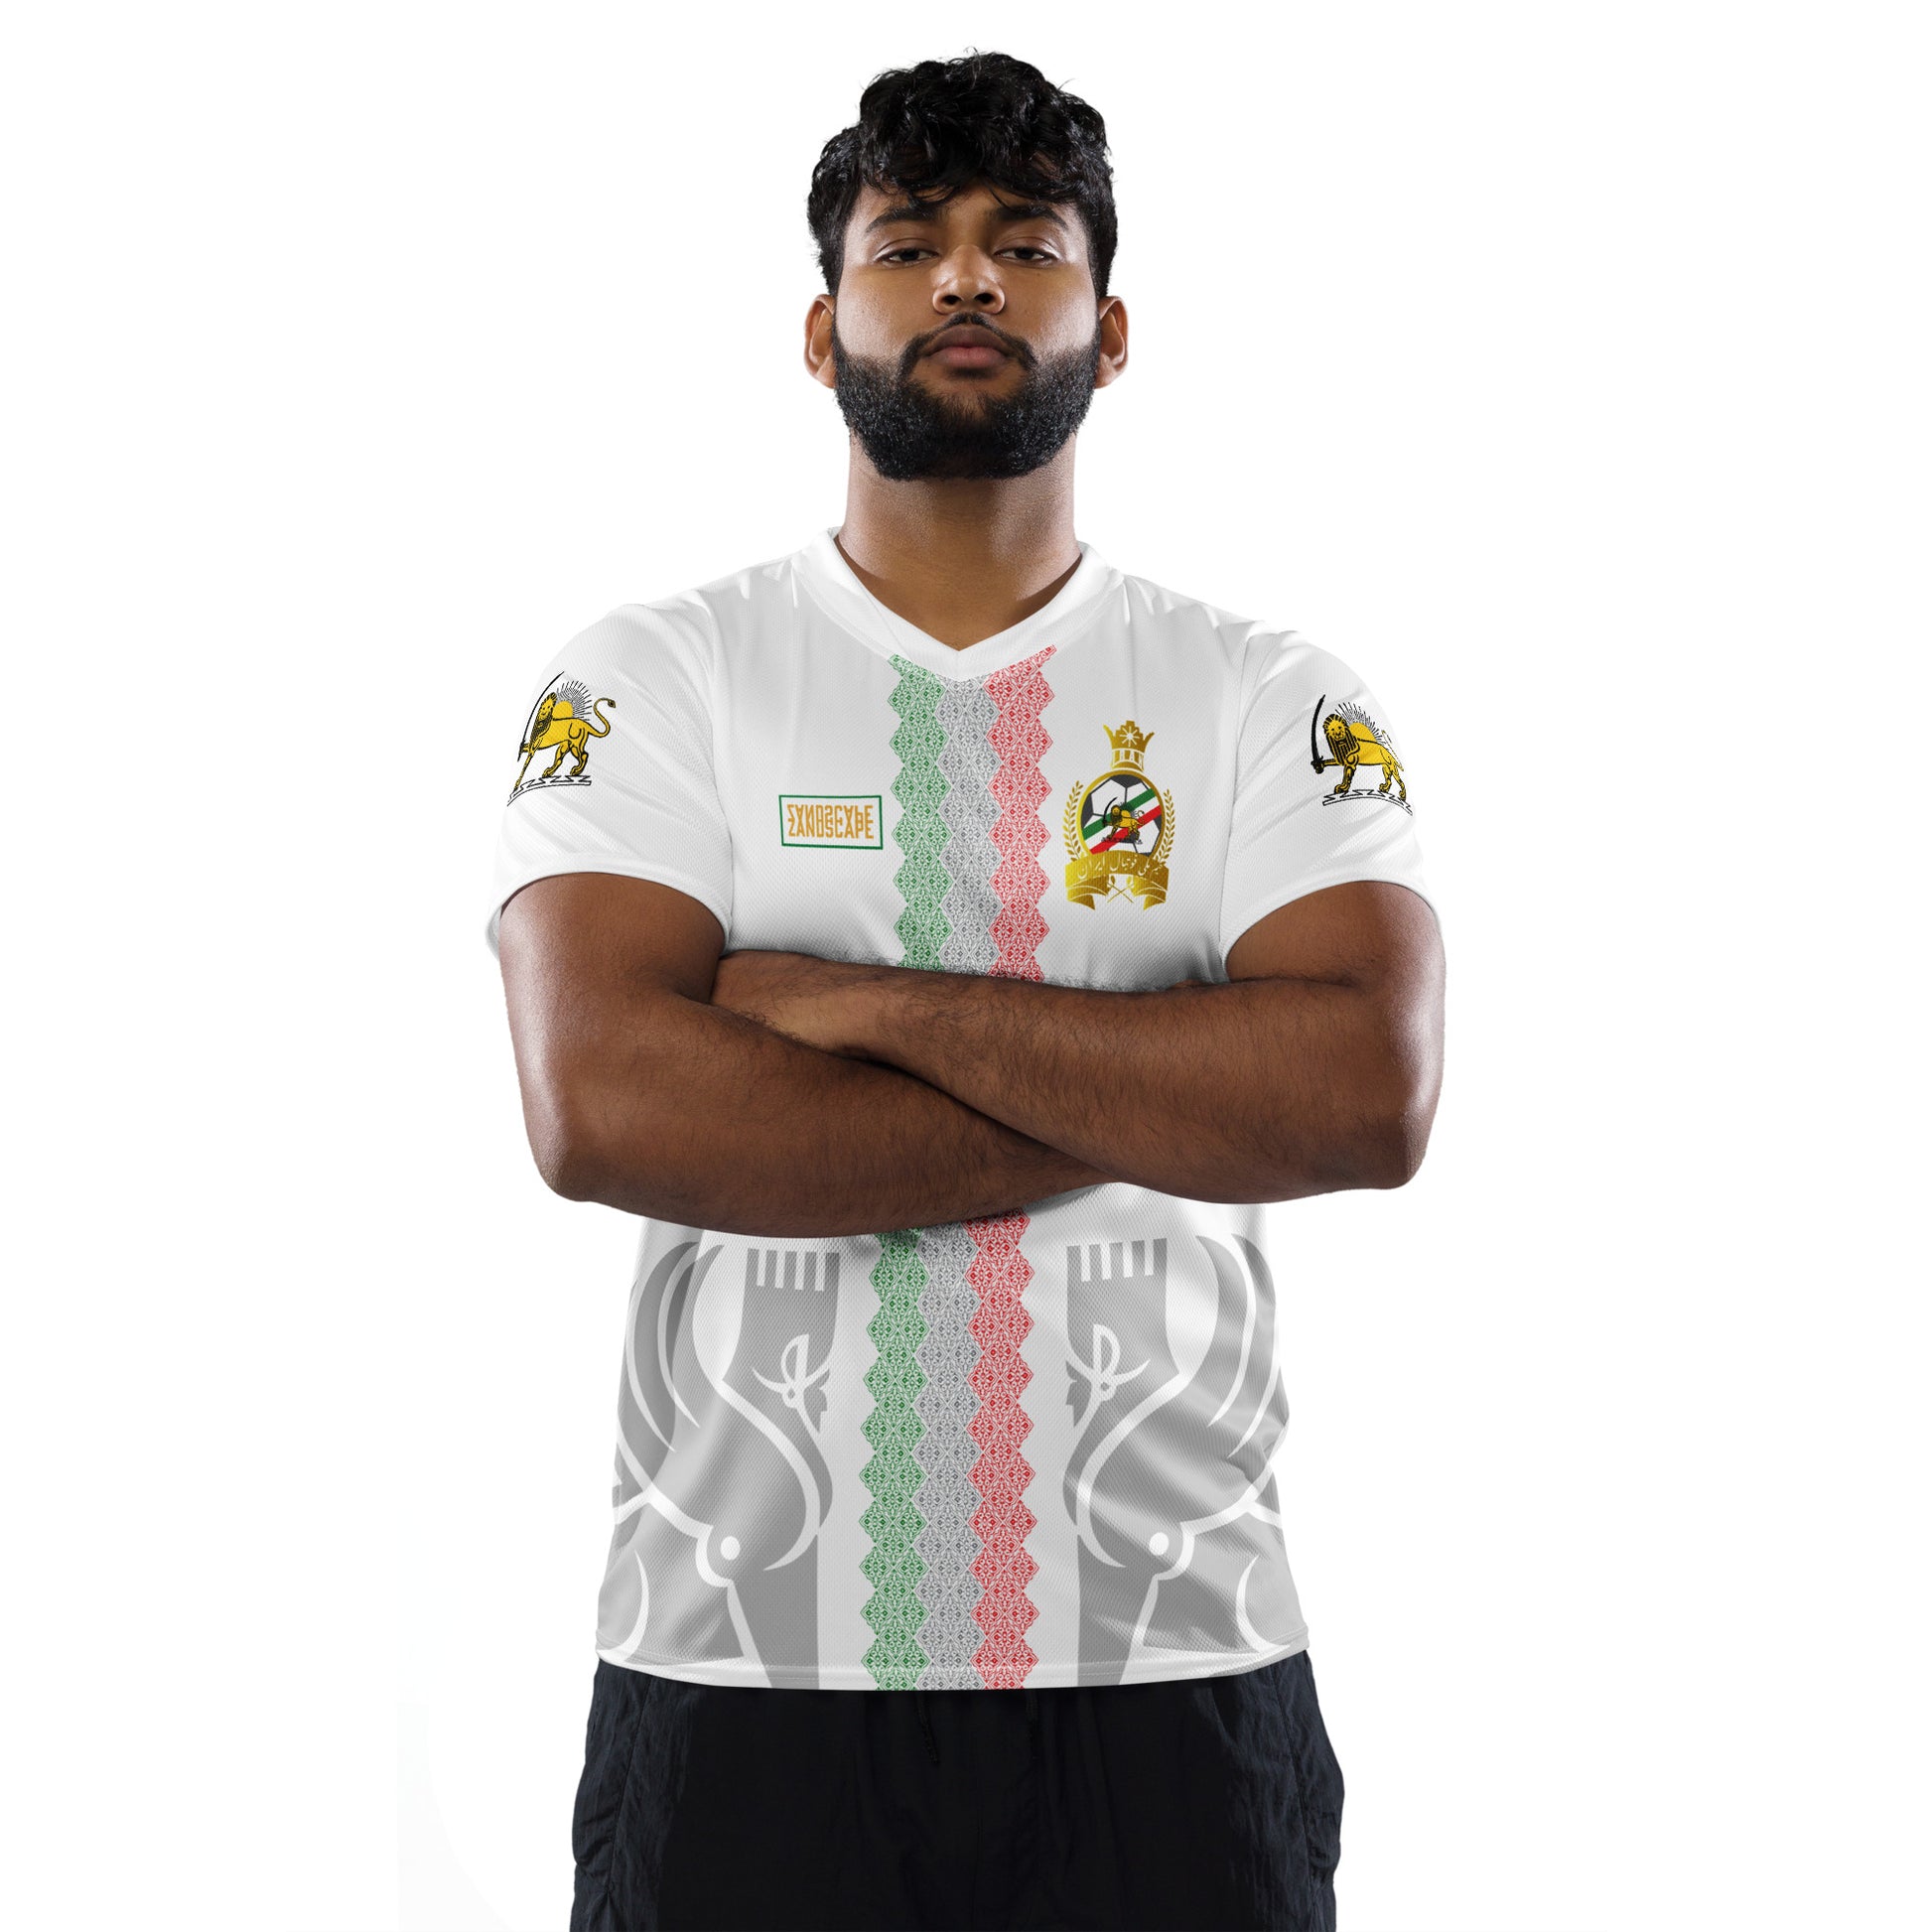 Team Melli Iran Football Customised Printed Jersey by Zandscape (Optional Name and Number Customisation) 2XL